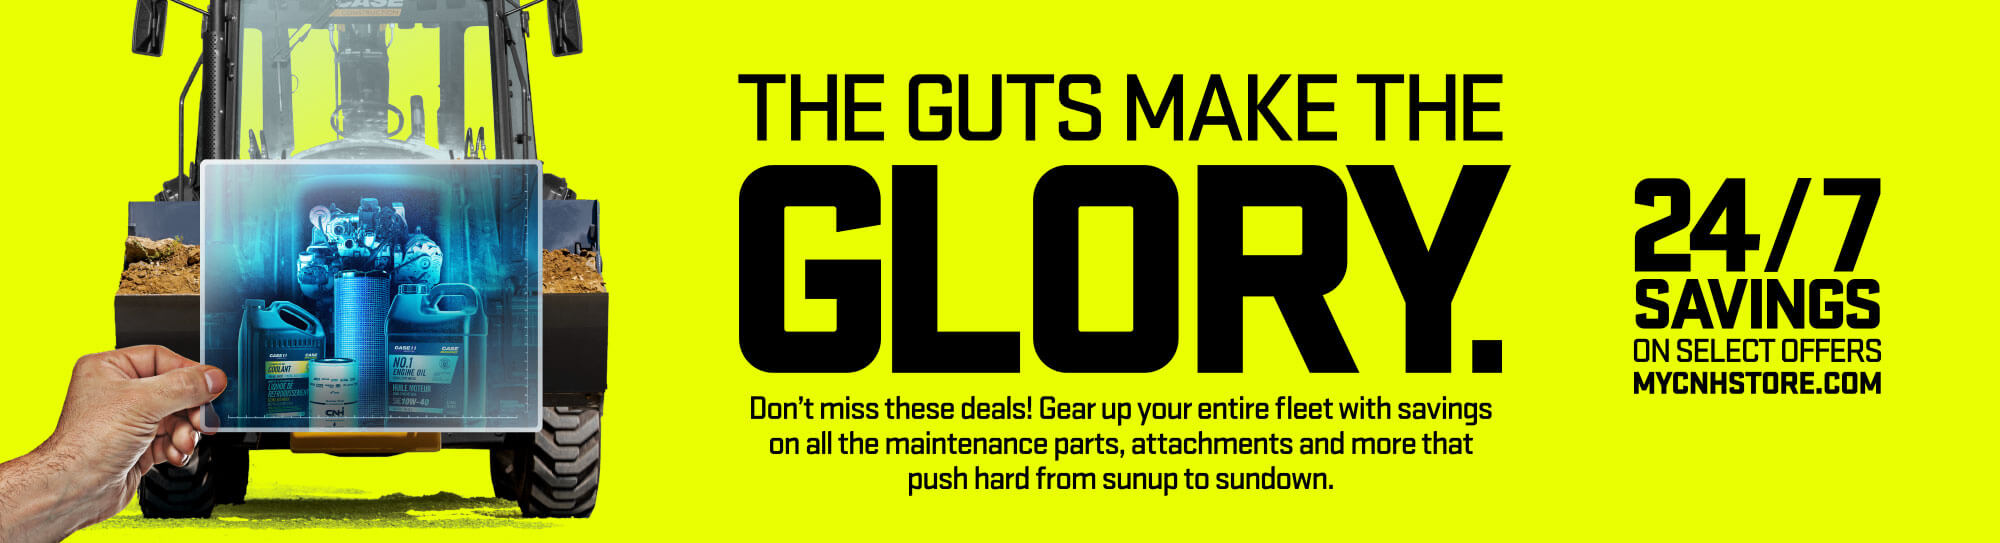 THE GUTS MAKE THE GLORY. Don't miss these deals! Gear up your entire fleet with savings on all the maintenance parts, attachments and more that push hard from sunup to sundown.